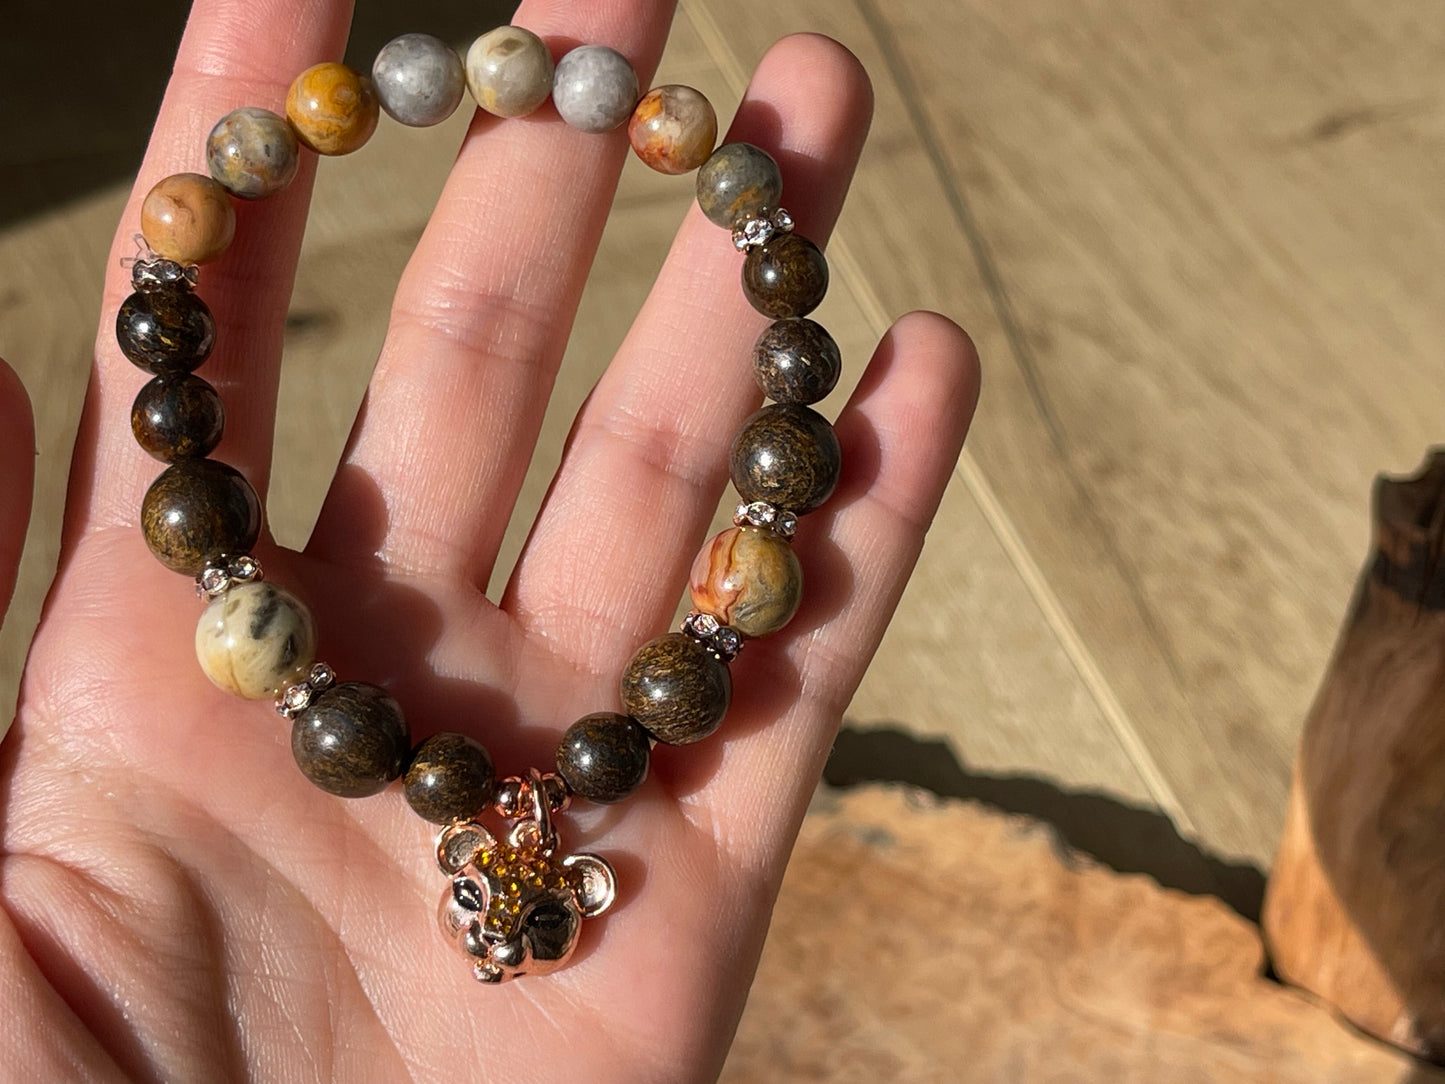 Bronzite and crazy lace agate panther bracelet